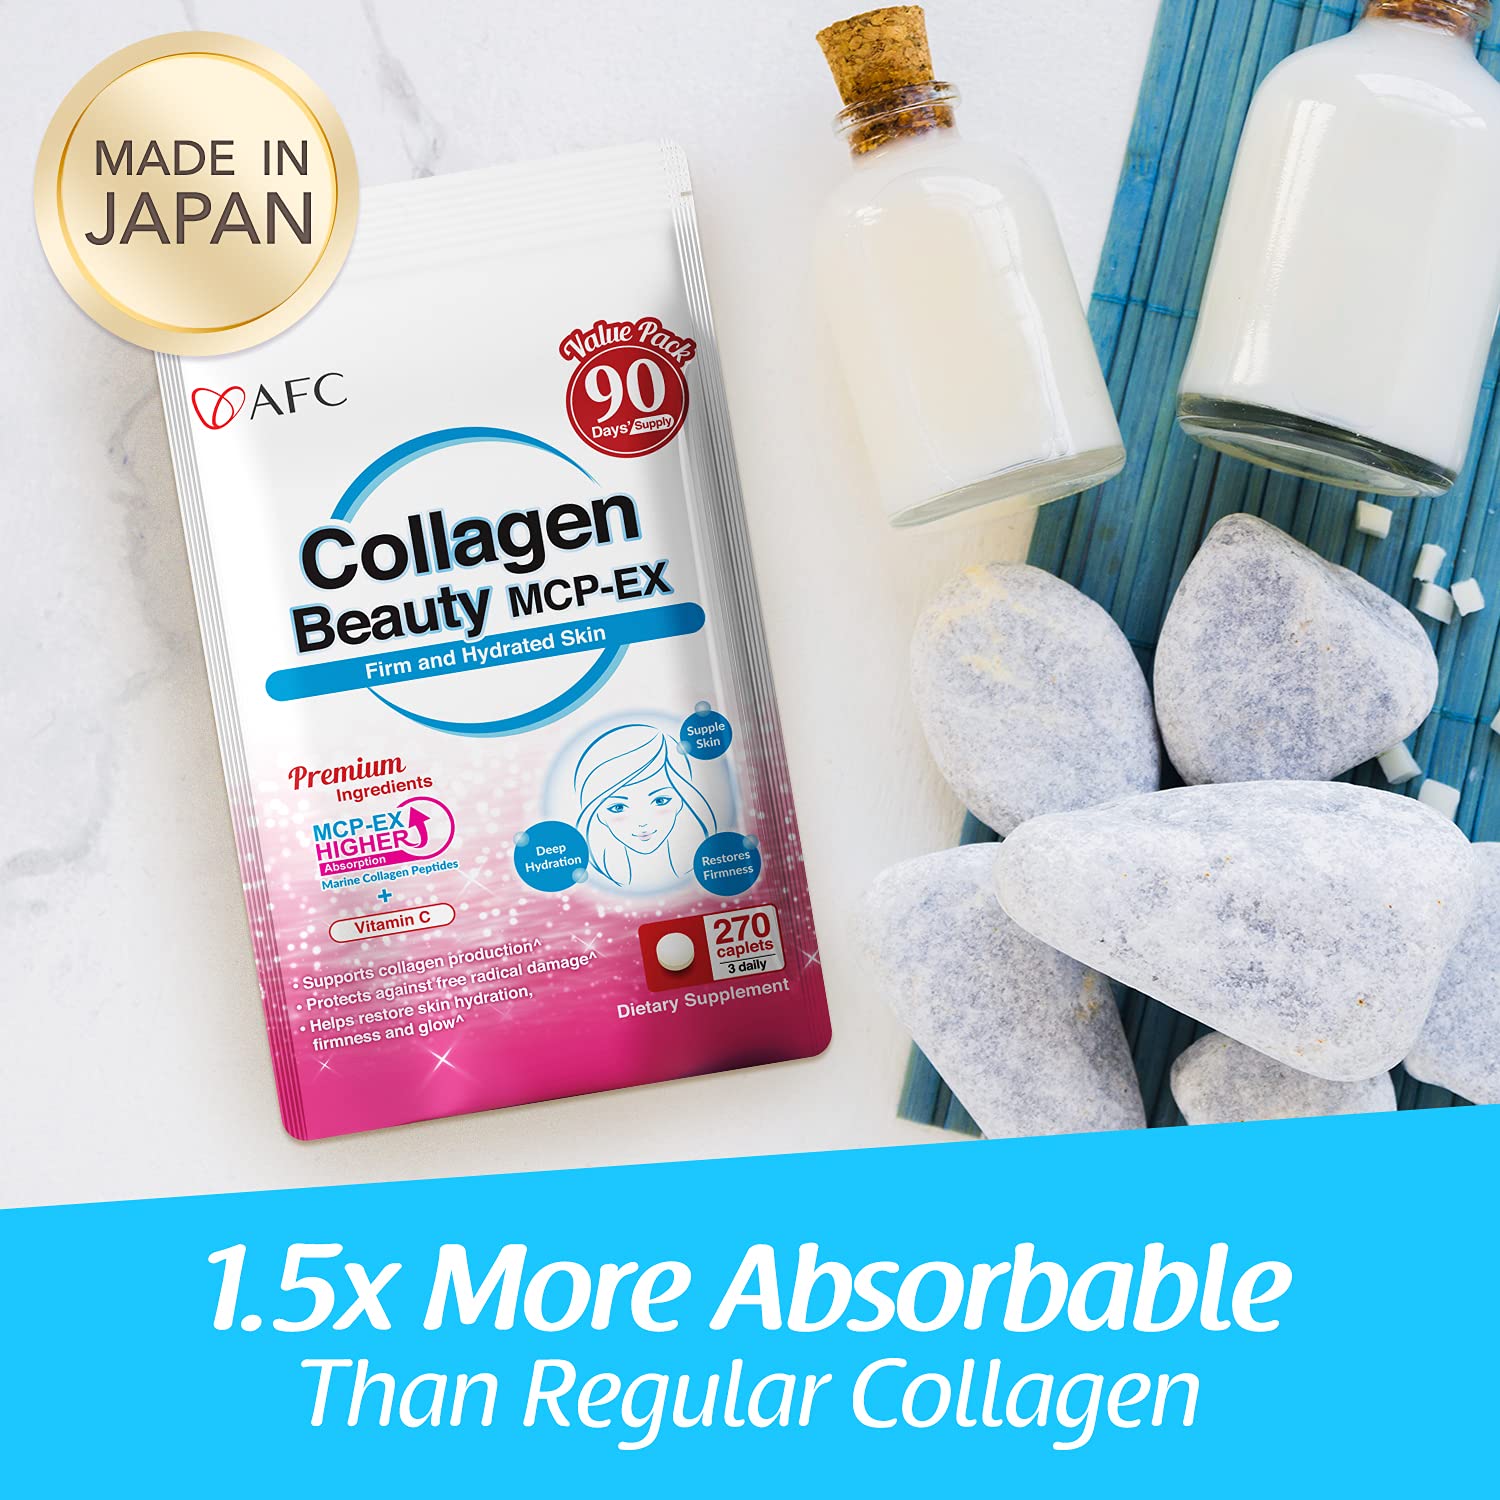 Mua AFC Japan Collagen Beauty MCP-EX with Marine Collagen Peptide,   Better Absorption Than Other Collagen, for Anti-Aging, Skin, Hair, Nails,  Bone and Joints, for Women & Men, 90 Days Supply trên